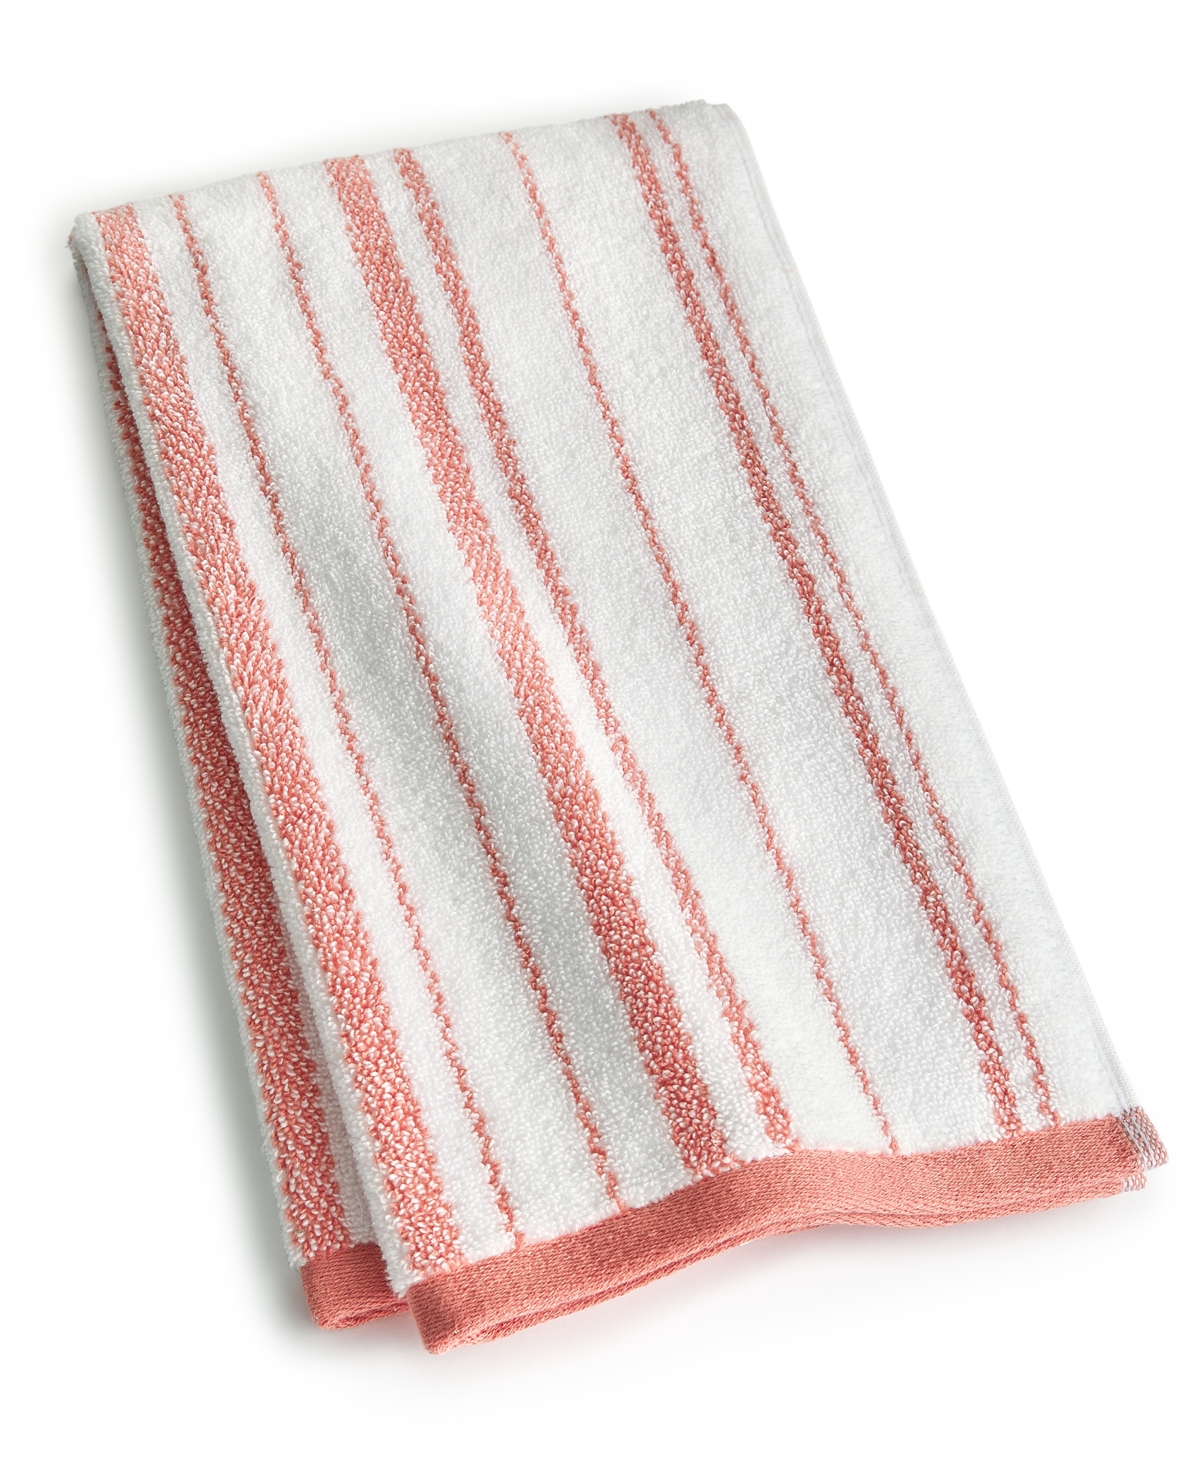 Charter Club Feel Fresh Antimicrobial Washcloth, 13 x 13, Created for Macy's - White Lily